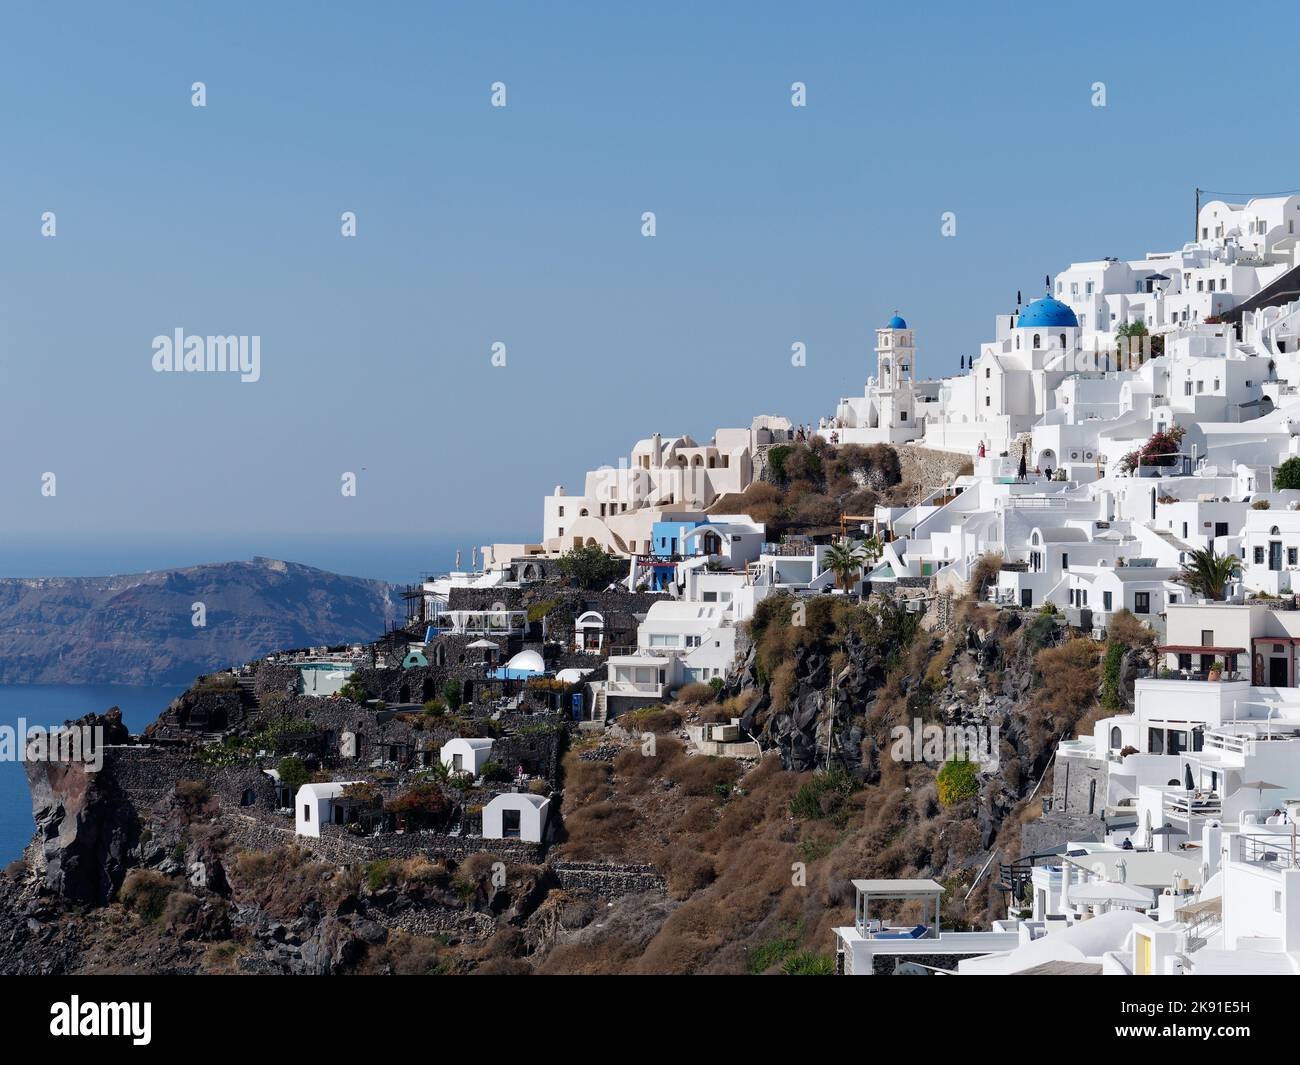 Town of Imerovigli set on a cliff with a traditional blue domed church on the Greek Cyclades island of Santorini in the Aegean Sea Stock Photo